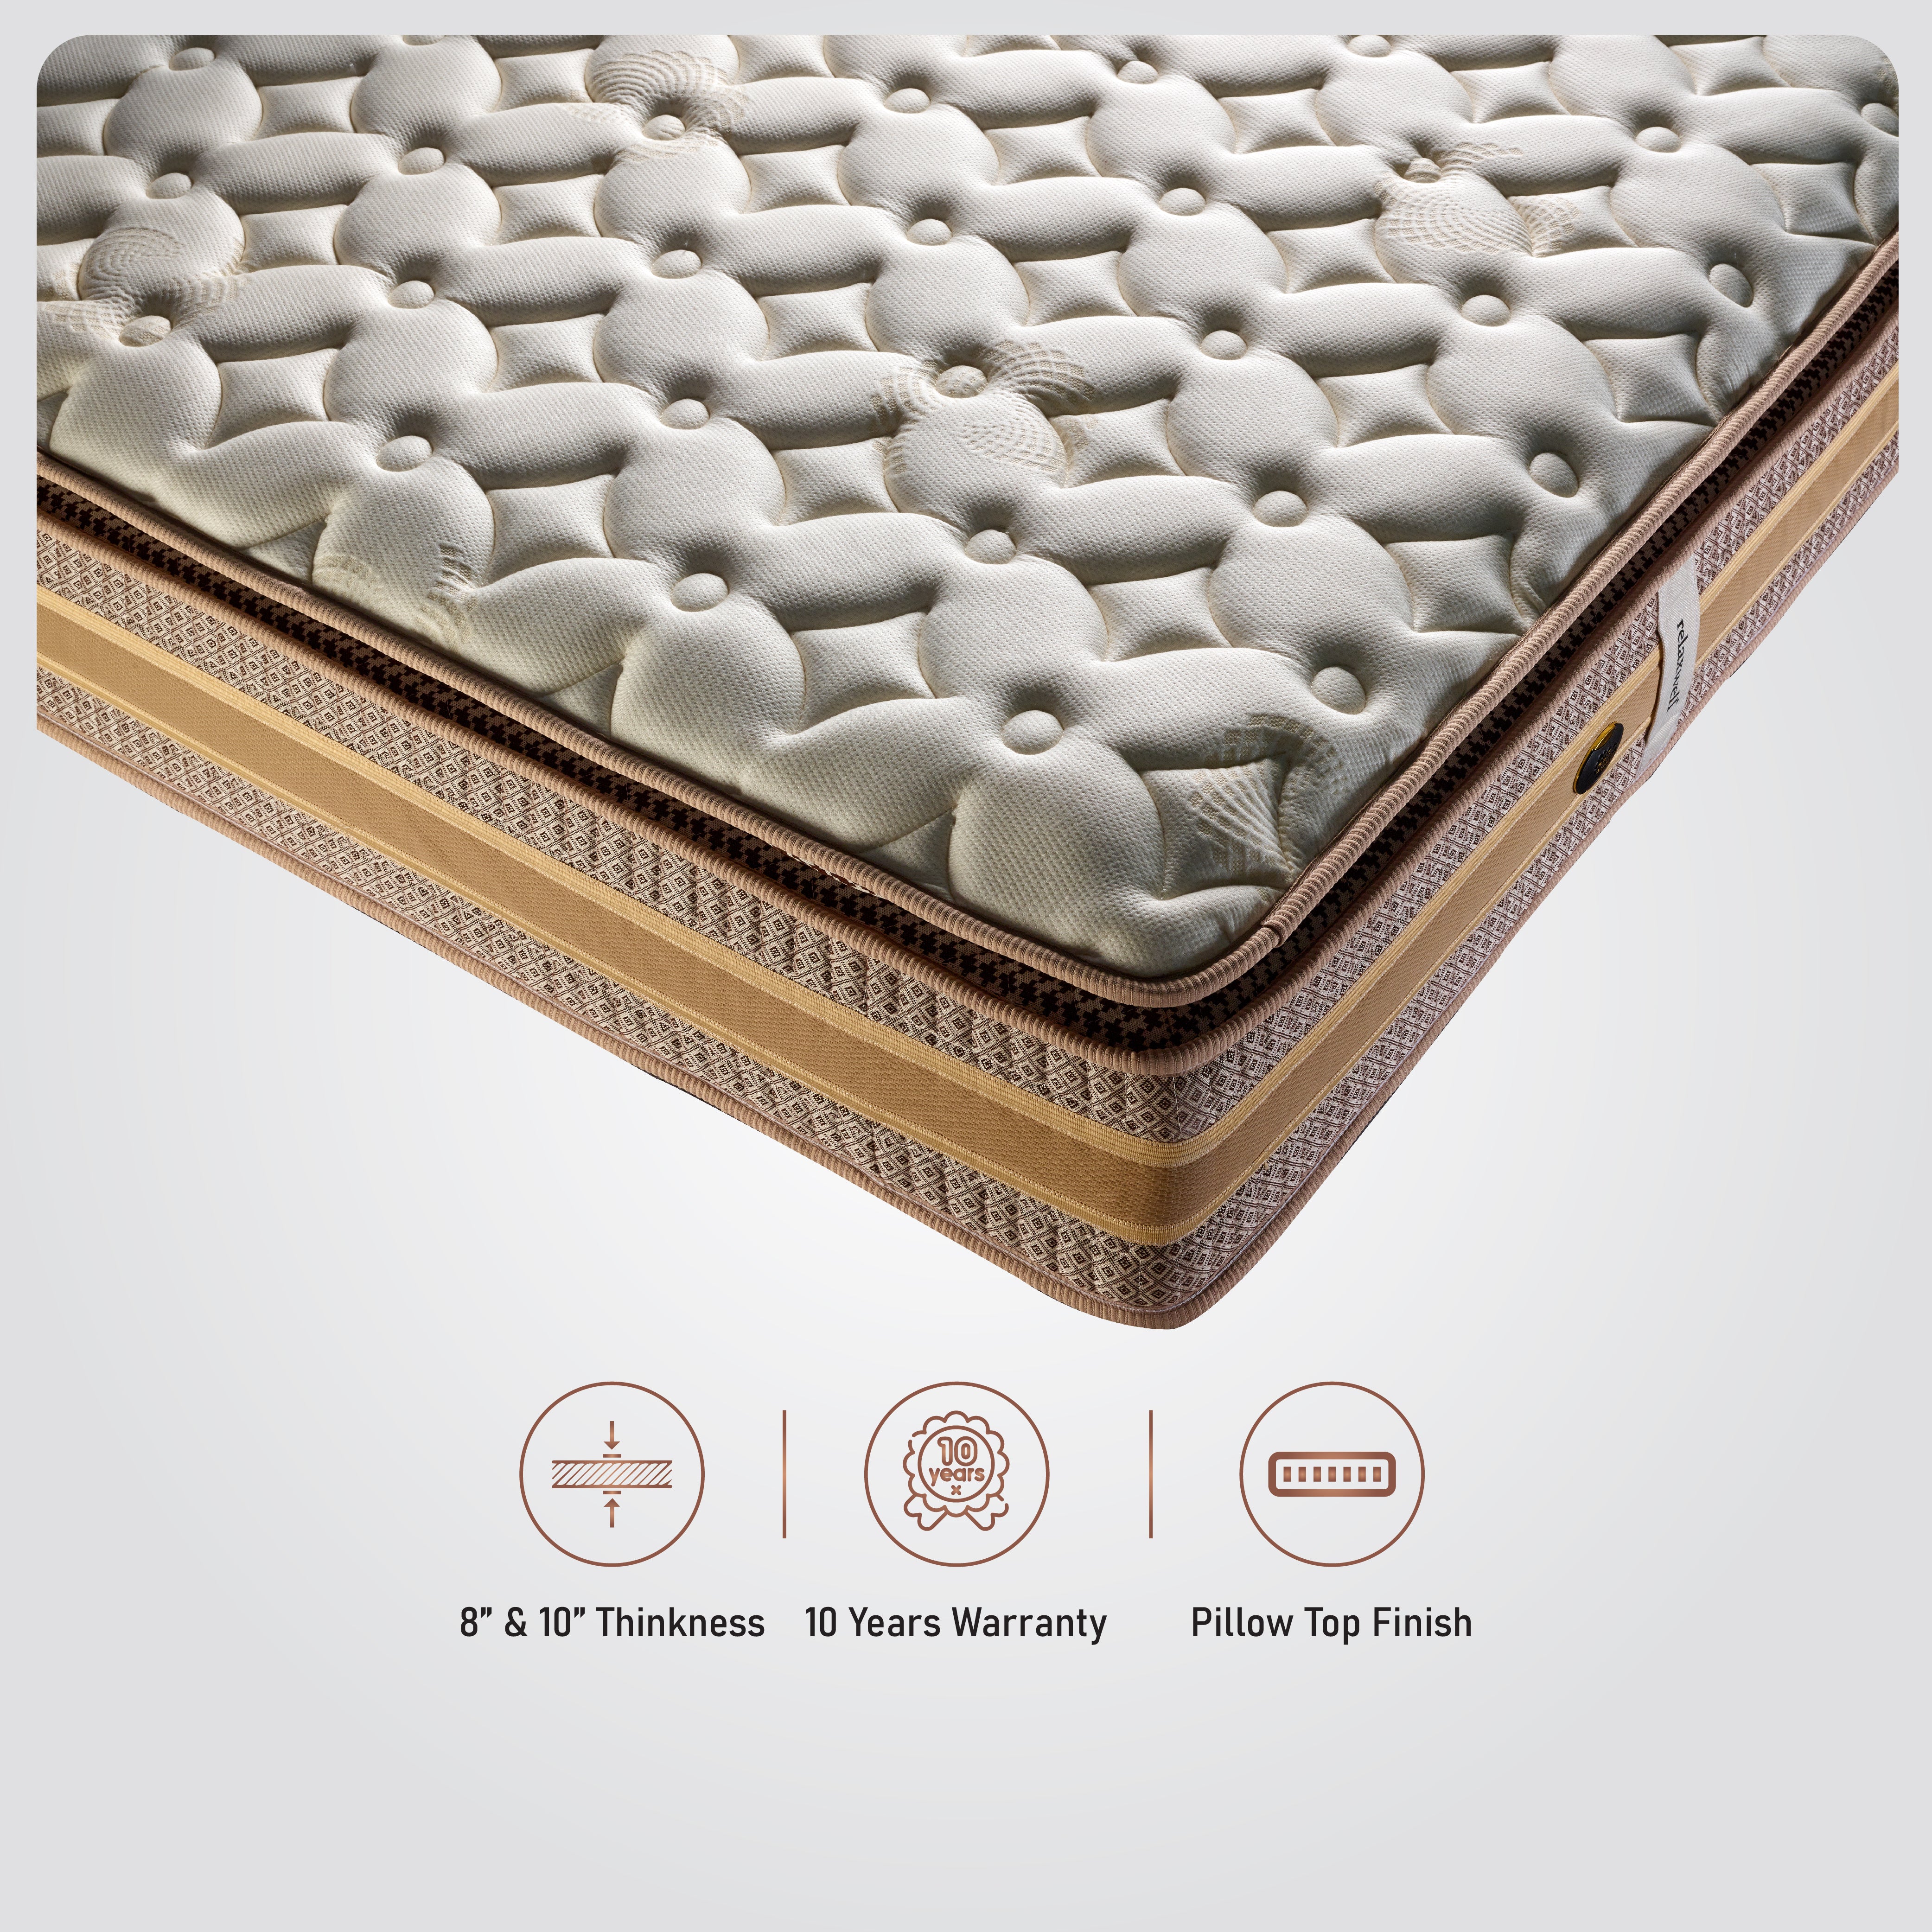 Buy Copper Infused Pocketed Spring Mattress In India